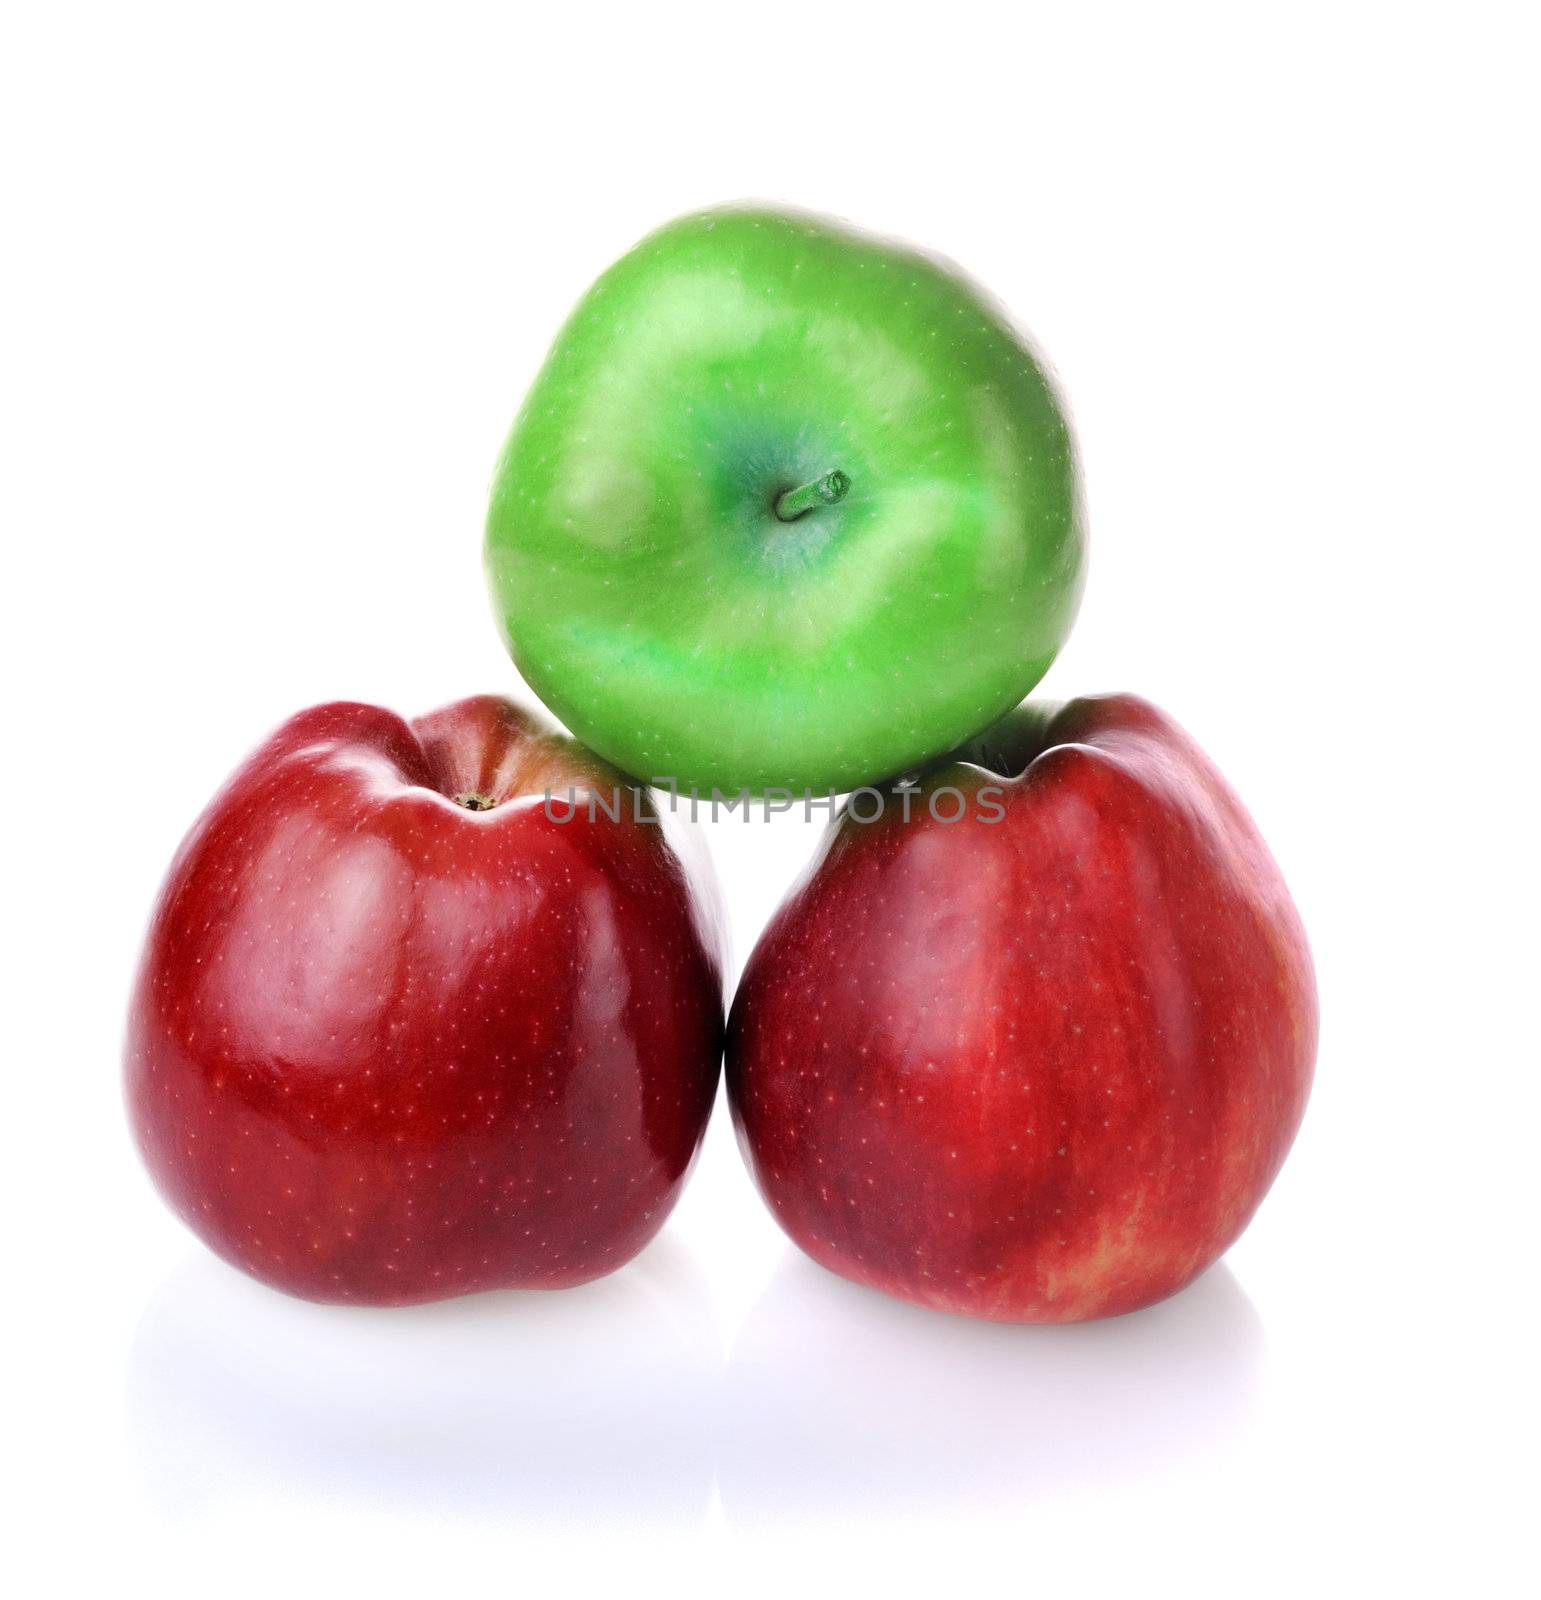 Pyramid with one green apples and two red apples on white background